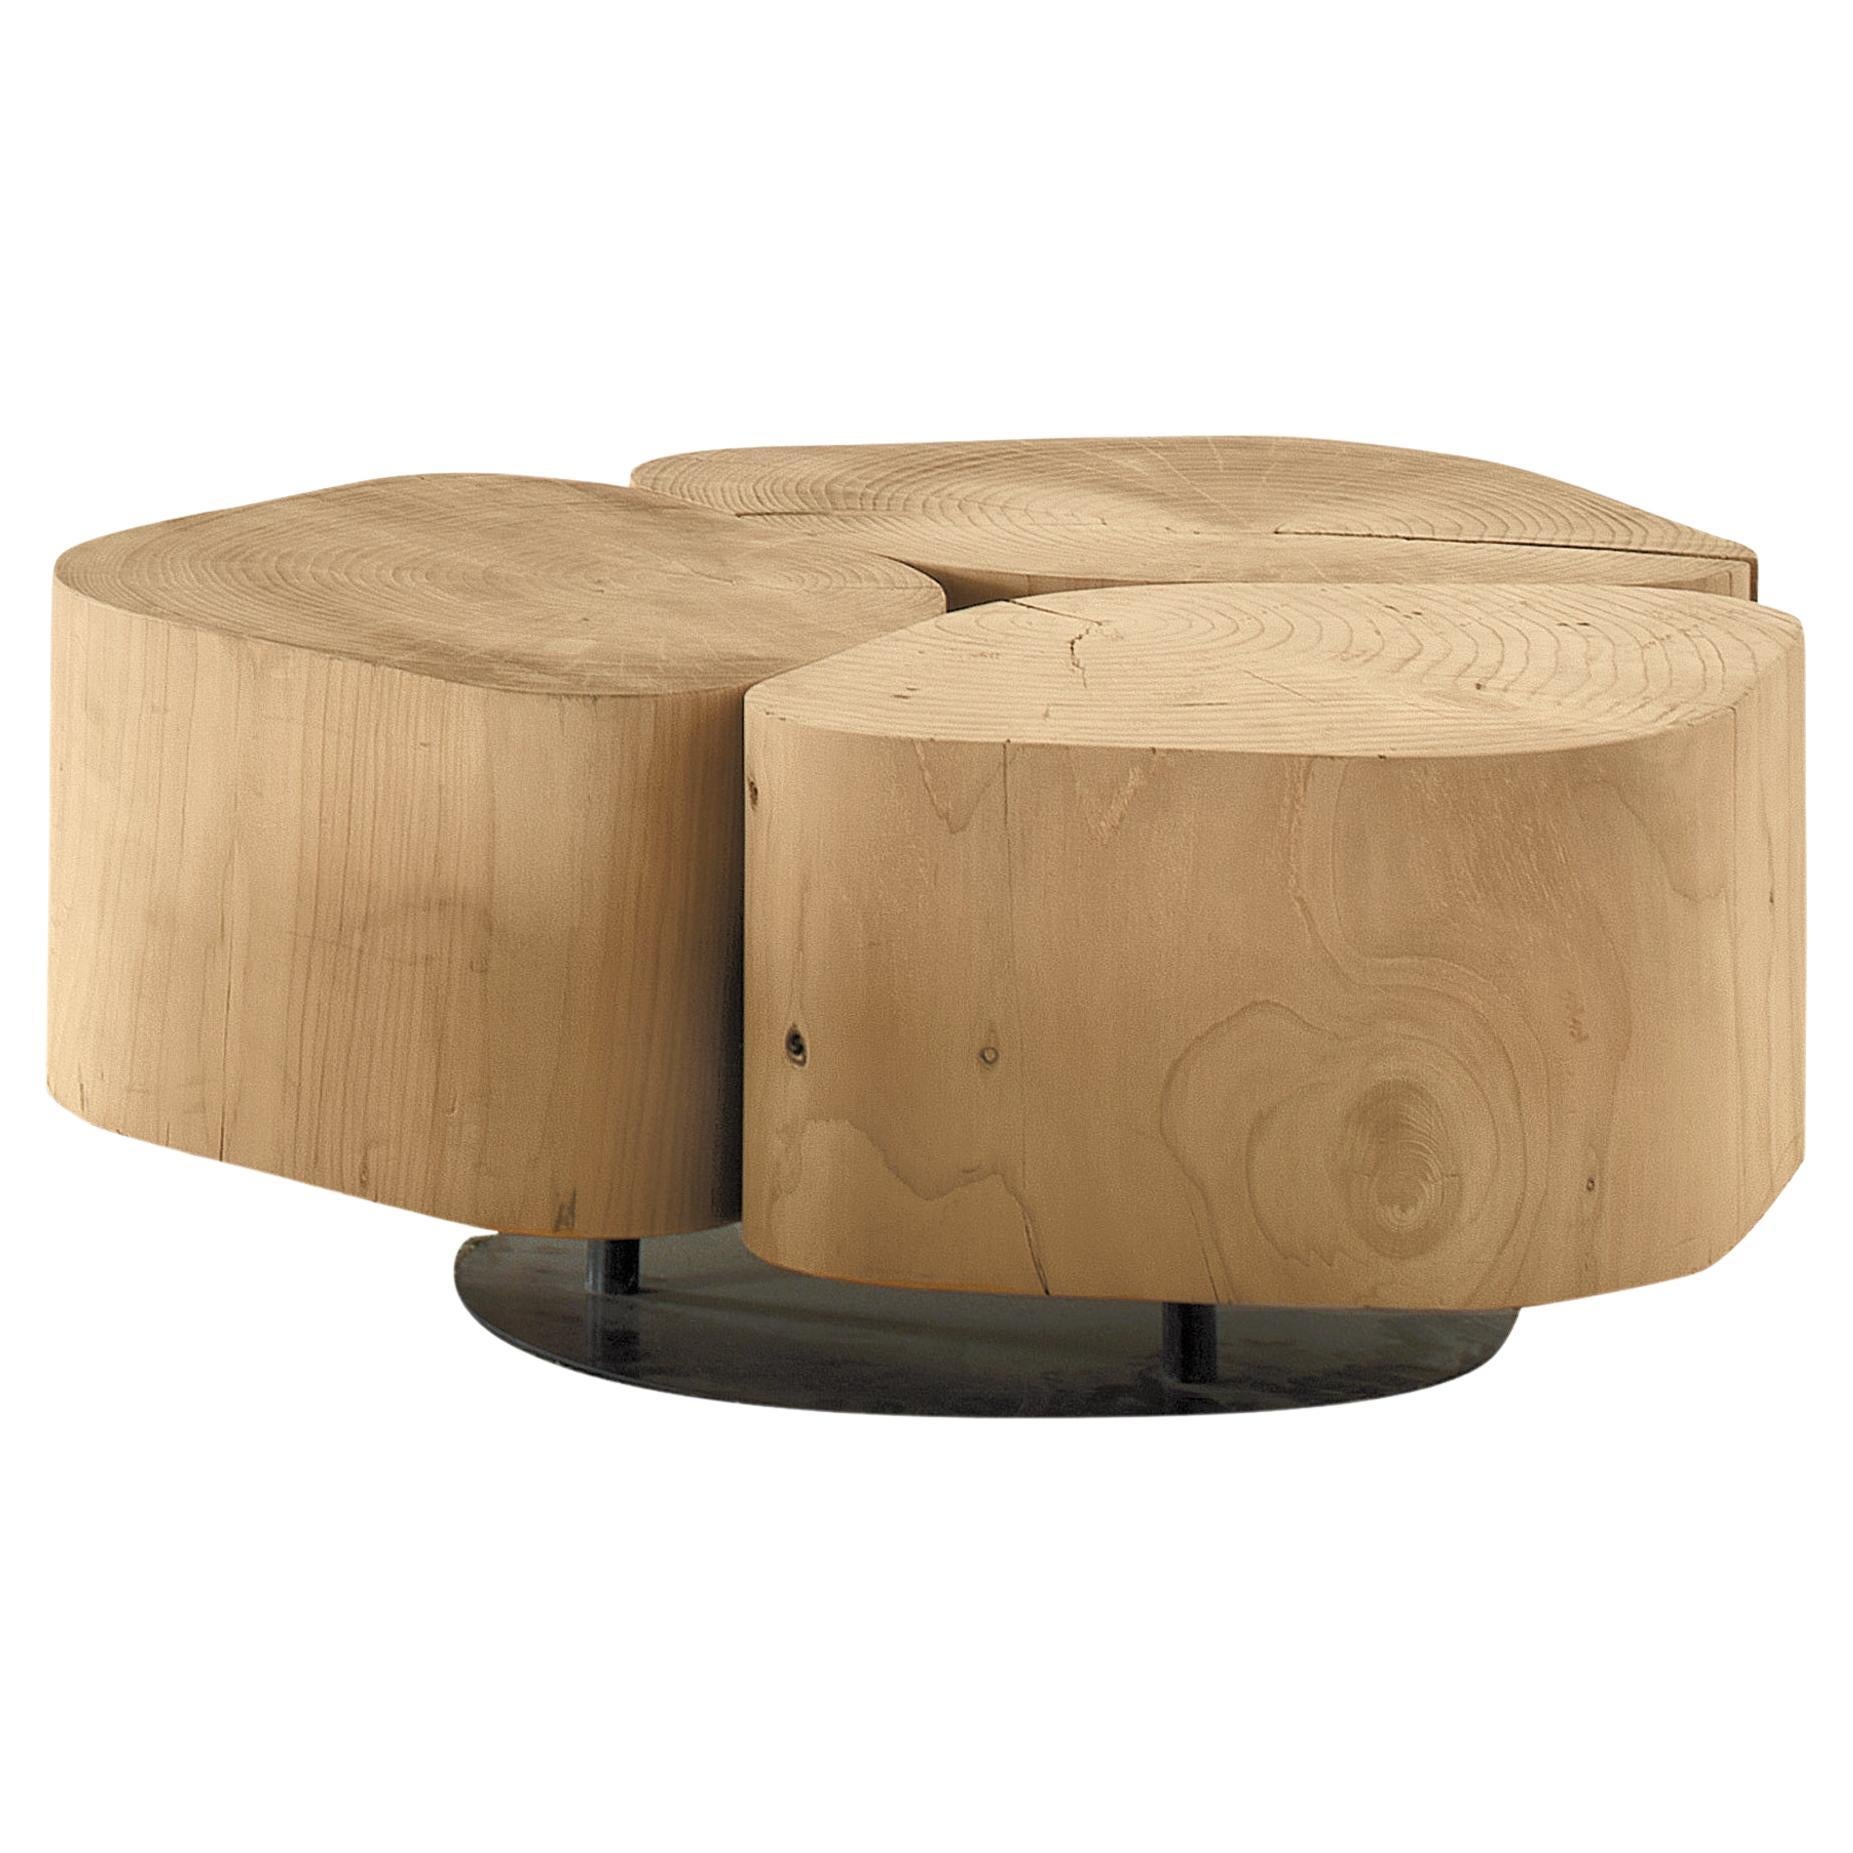 Tobi Coffee Tables Terry Dwan Contemporary Natural Cedar Made in Italy Riva1920